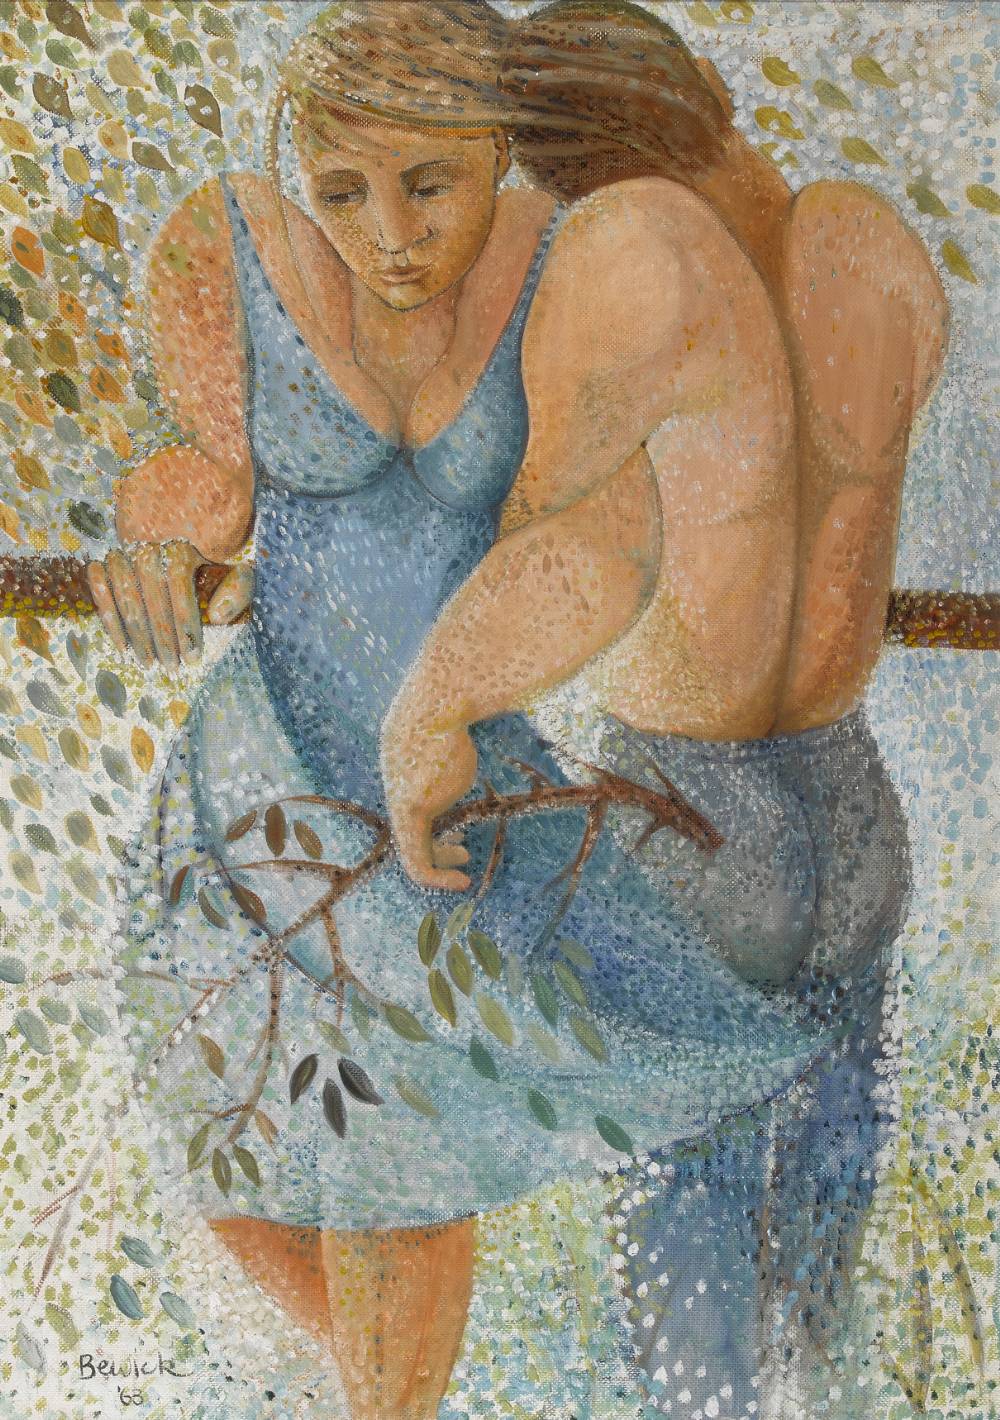 THE ORCHARD, 1963 by Pauline Bewick sold for 6,000 at Whyte's Auctions